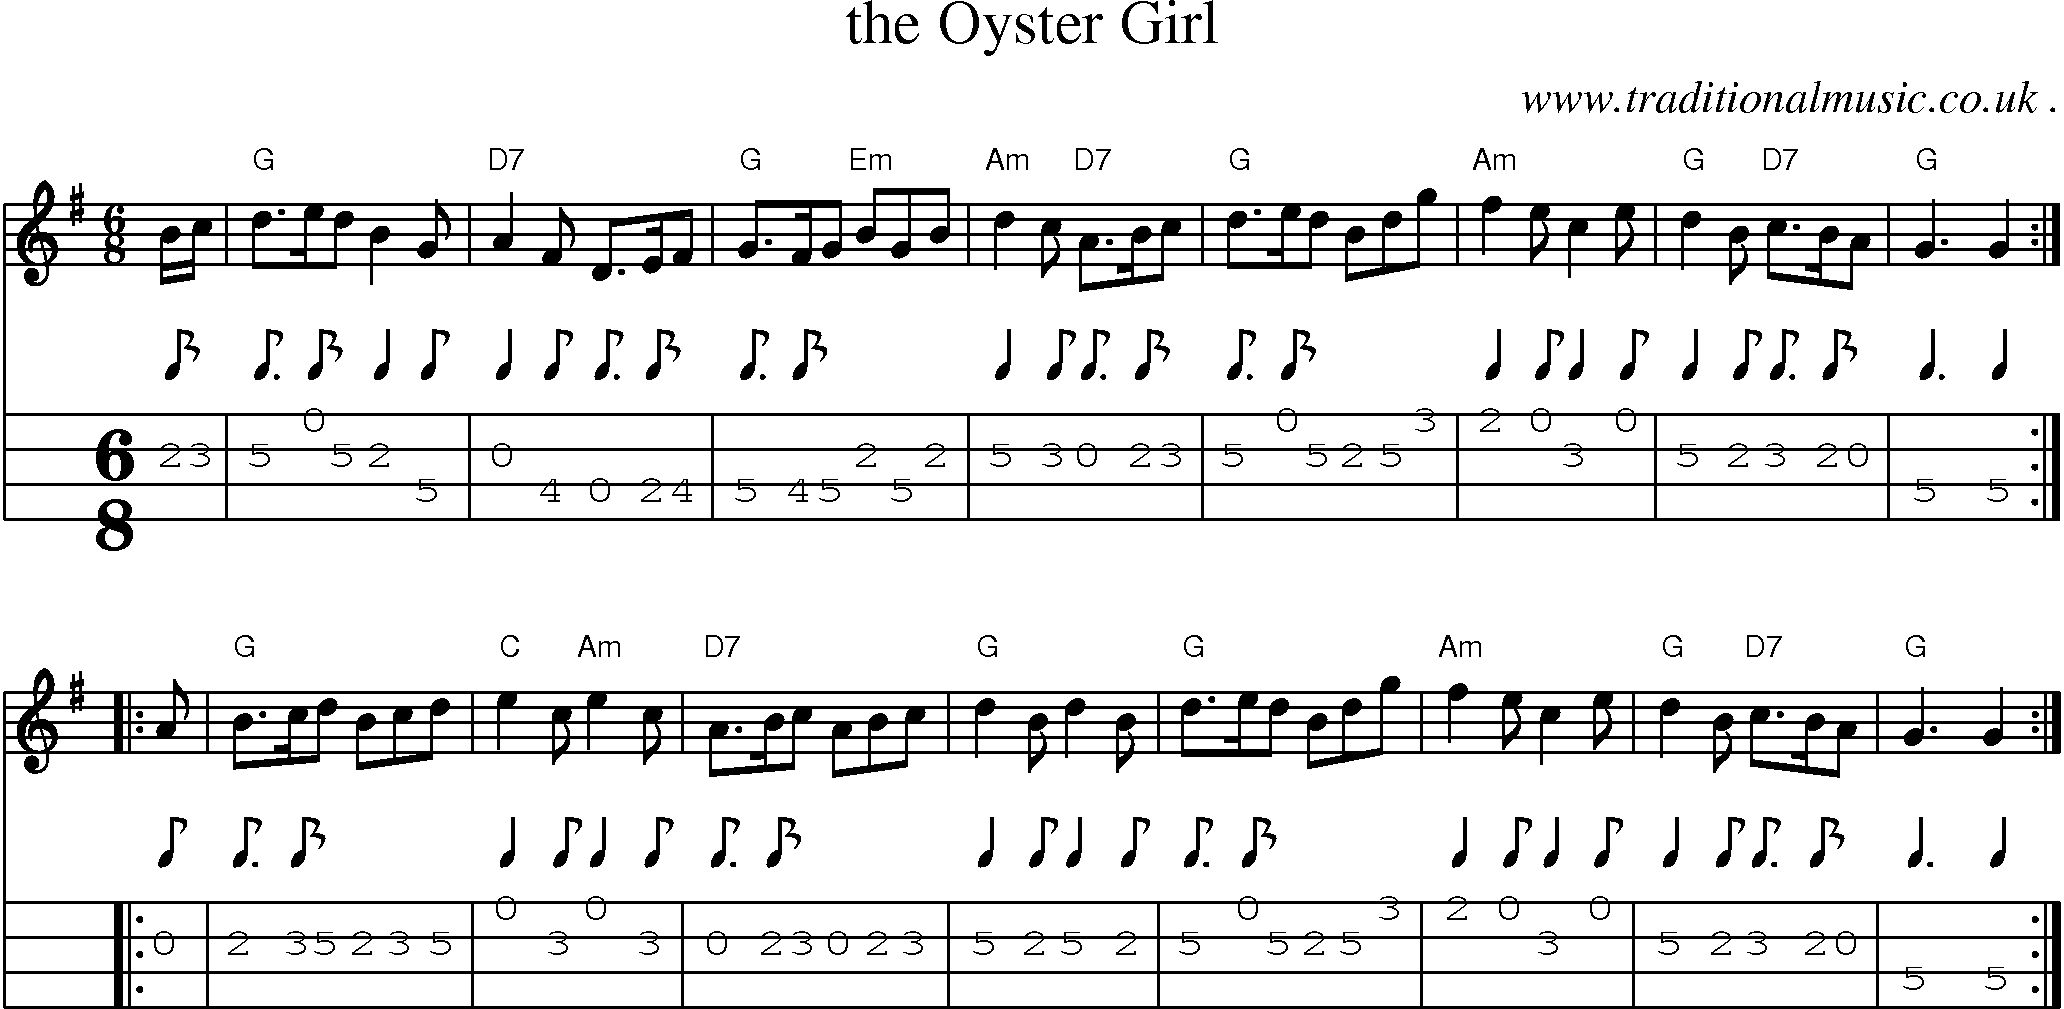 Sheet-music  score, Chords and Mandolin Tabs for The Oyster Girl